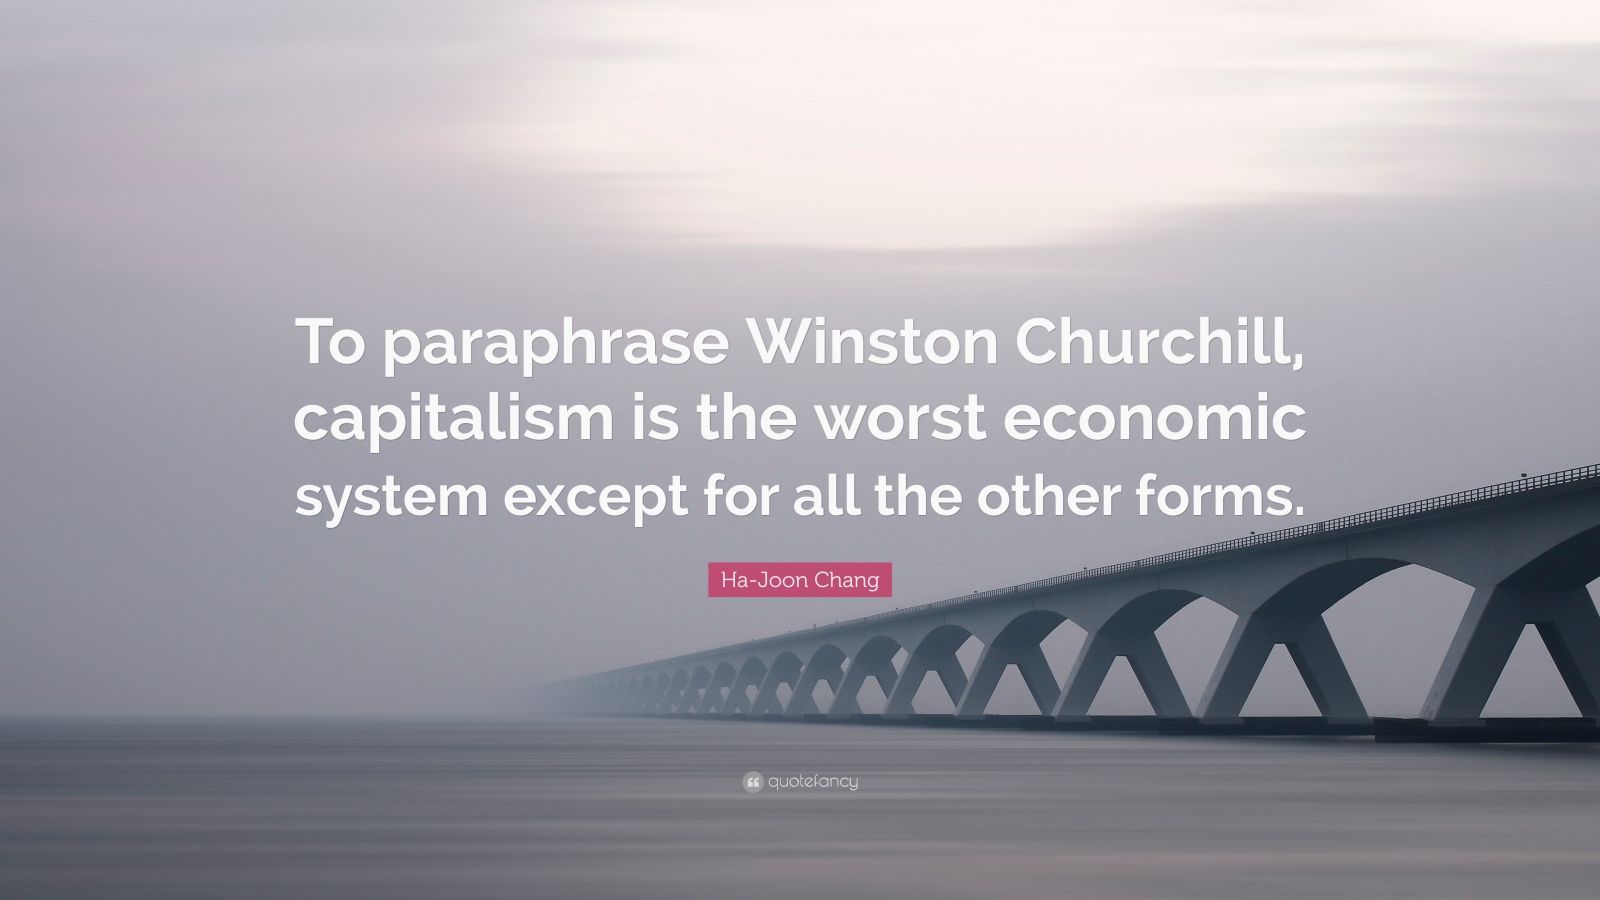 Ha-Joon Chang Quote: “To paraphrase Winston Churchill, capitalism is